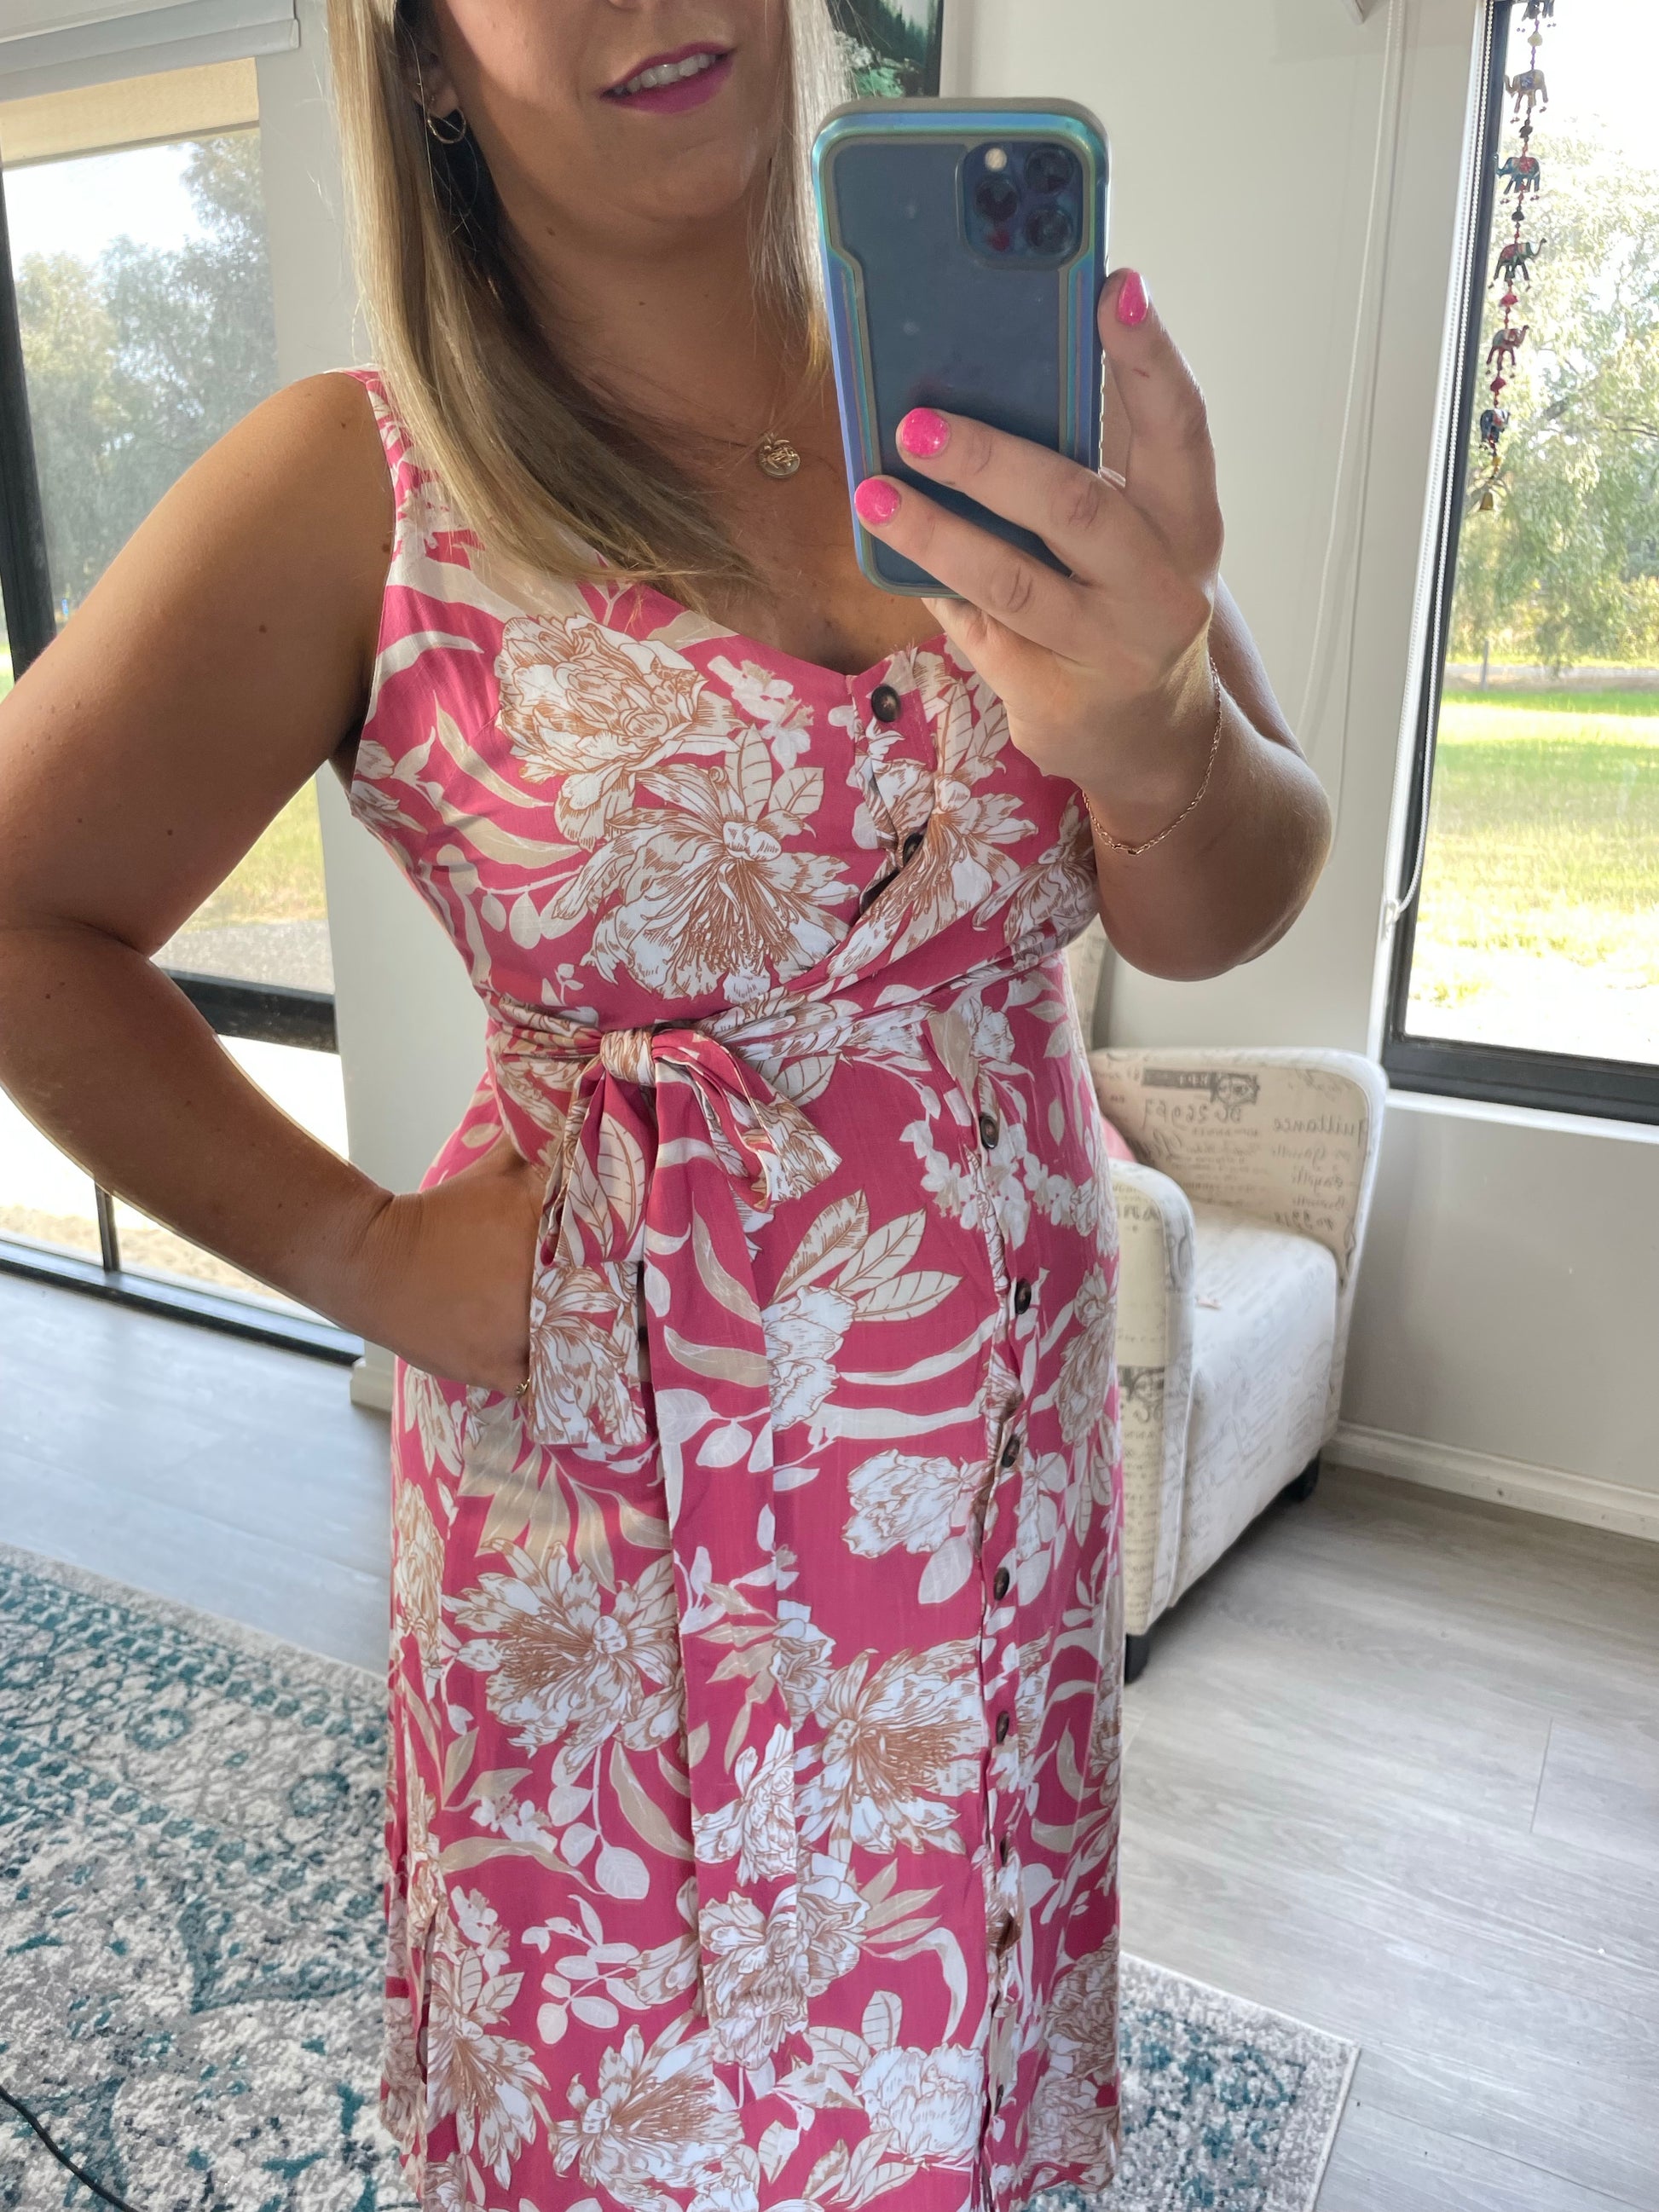 St Lucia Dress  - Pink Floral: 
Functional buttons - breastfeeding friendly
Self tying sash
True to size
Danika wears a 12
 - Ciao Bella Dresses 